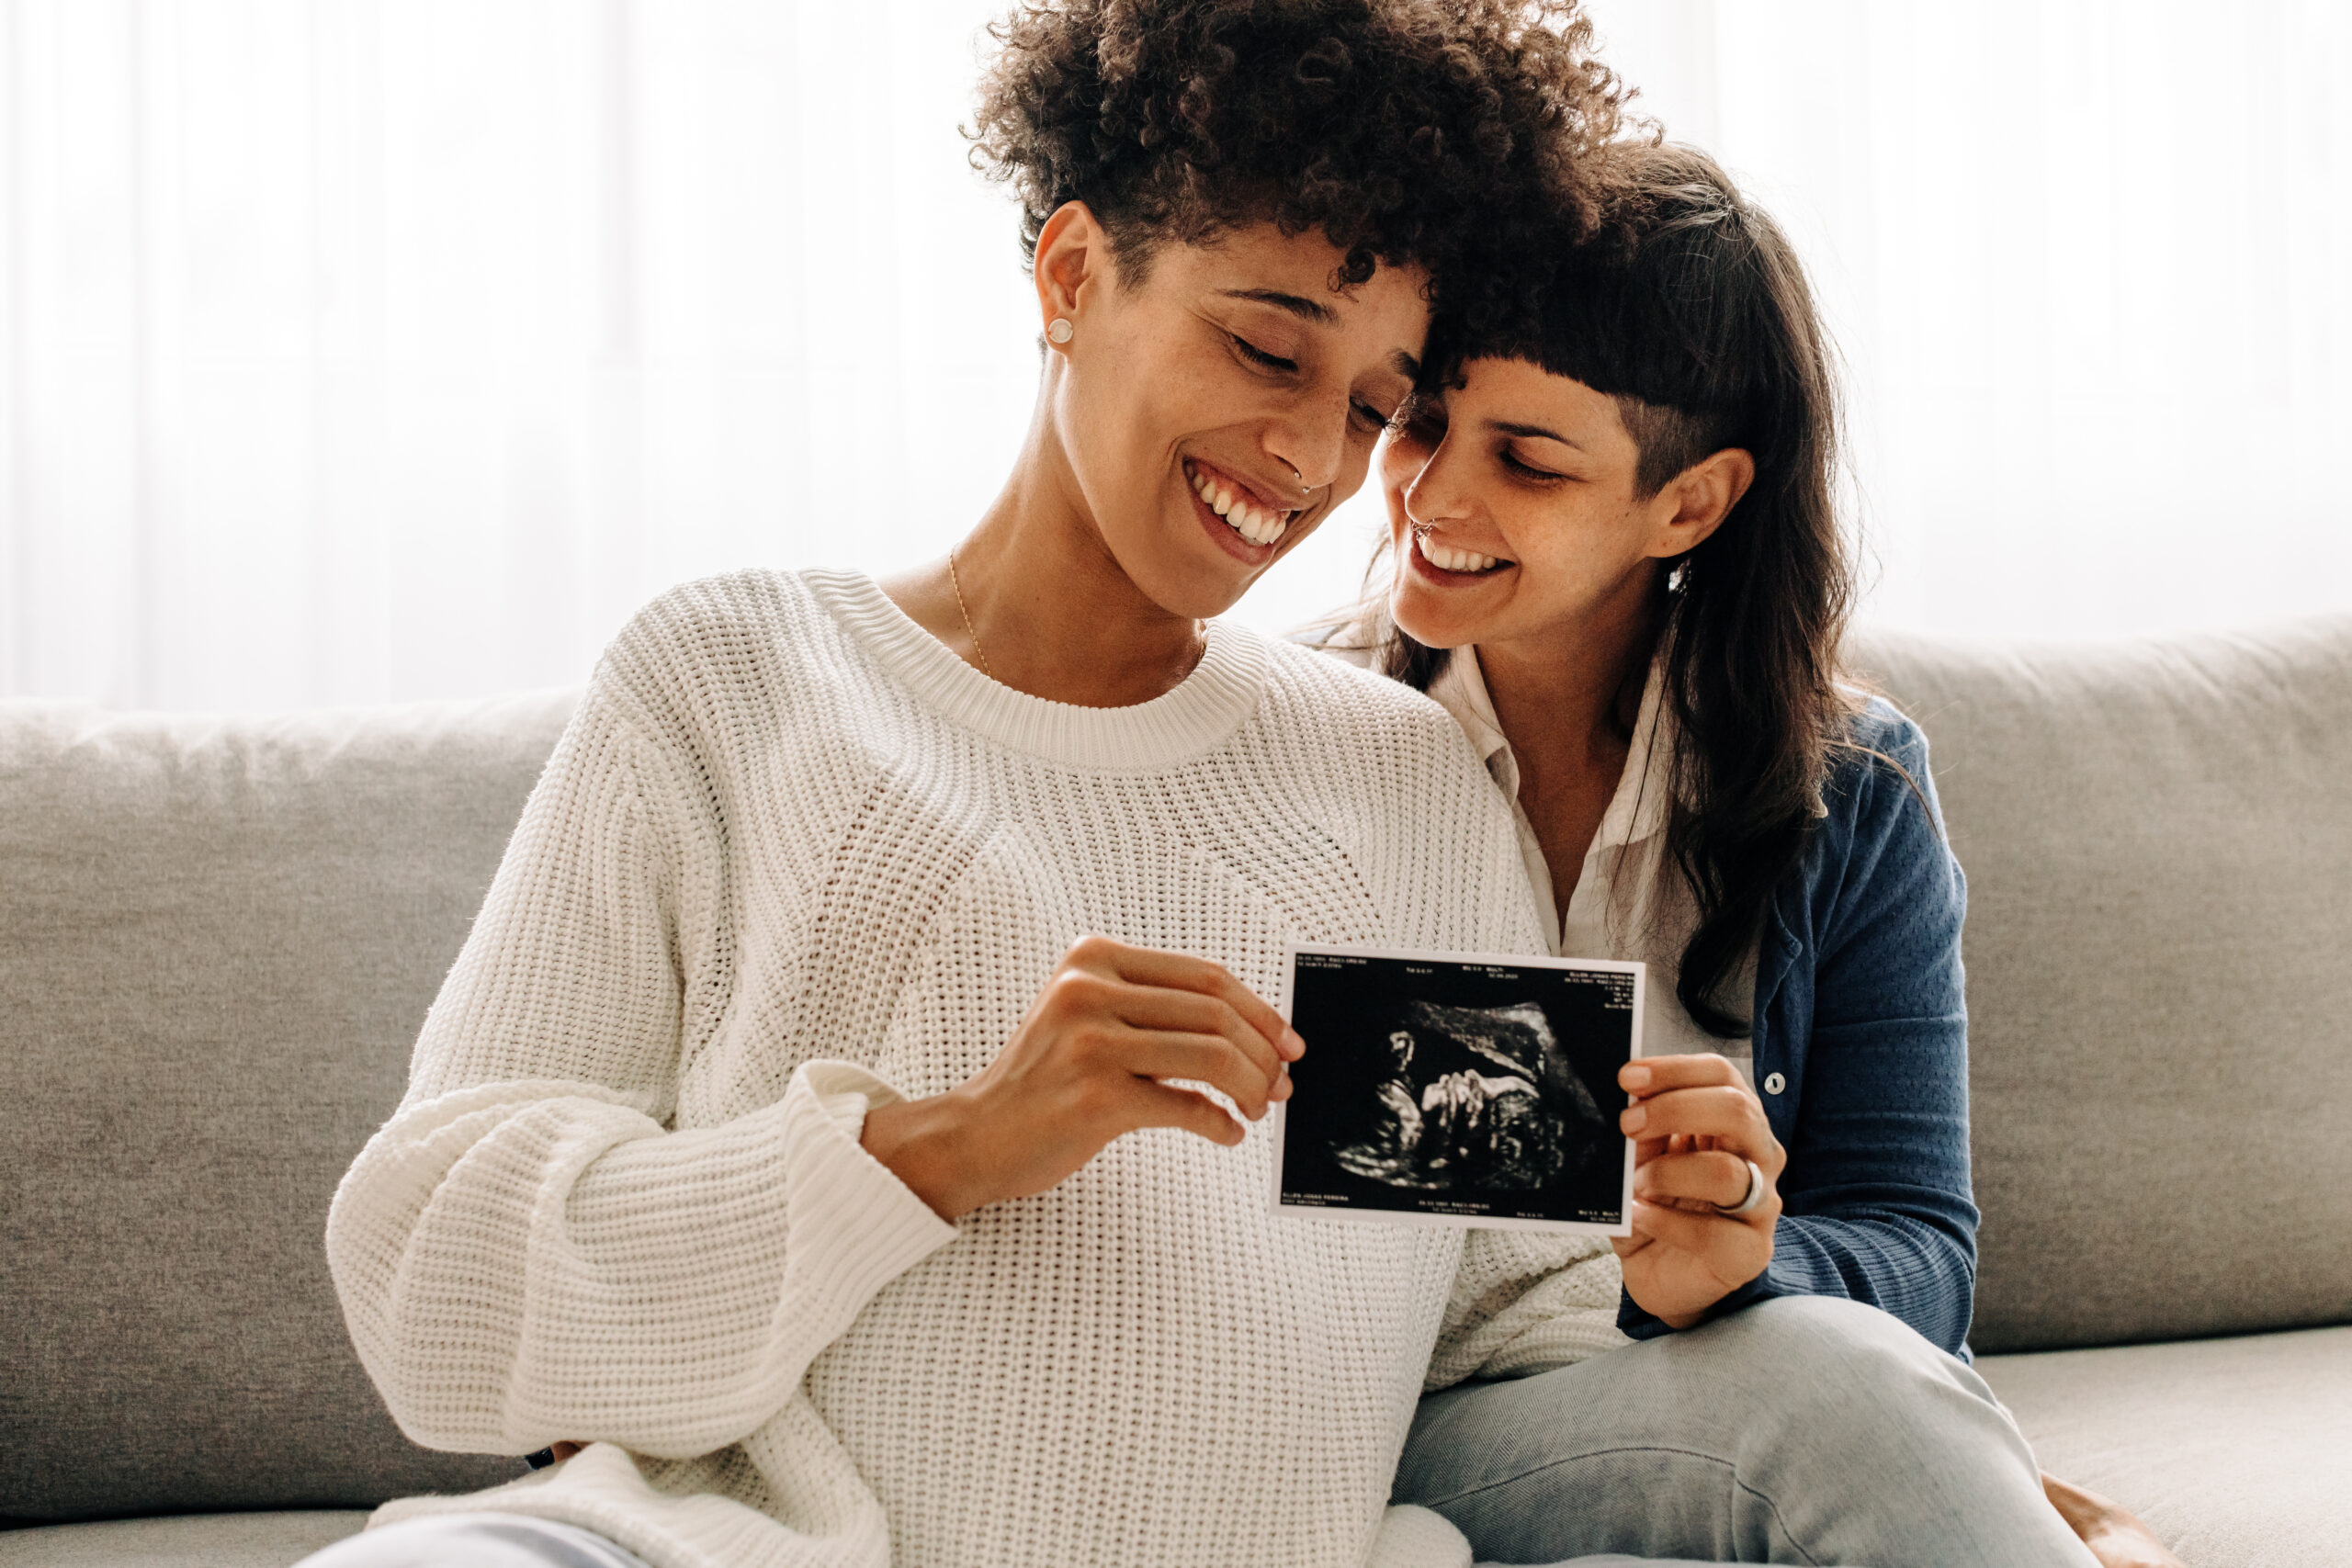 Same-sex pregnant couple holding up their ultrasound scan. Expectant lesbian couple smiling cheerfully while holding an ultrasound picture of their unborn baby. Young queer couple expecting a baby.